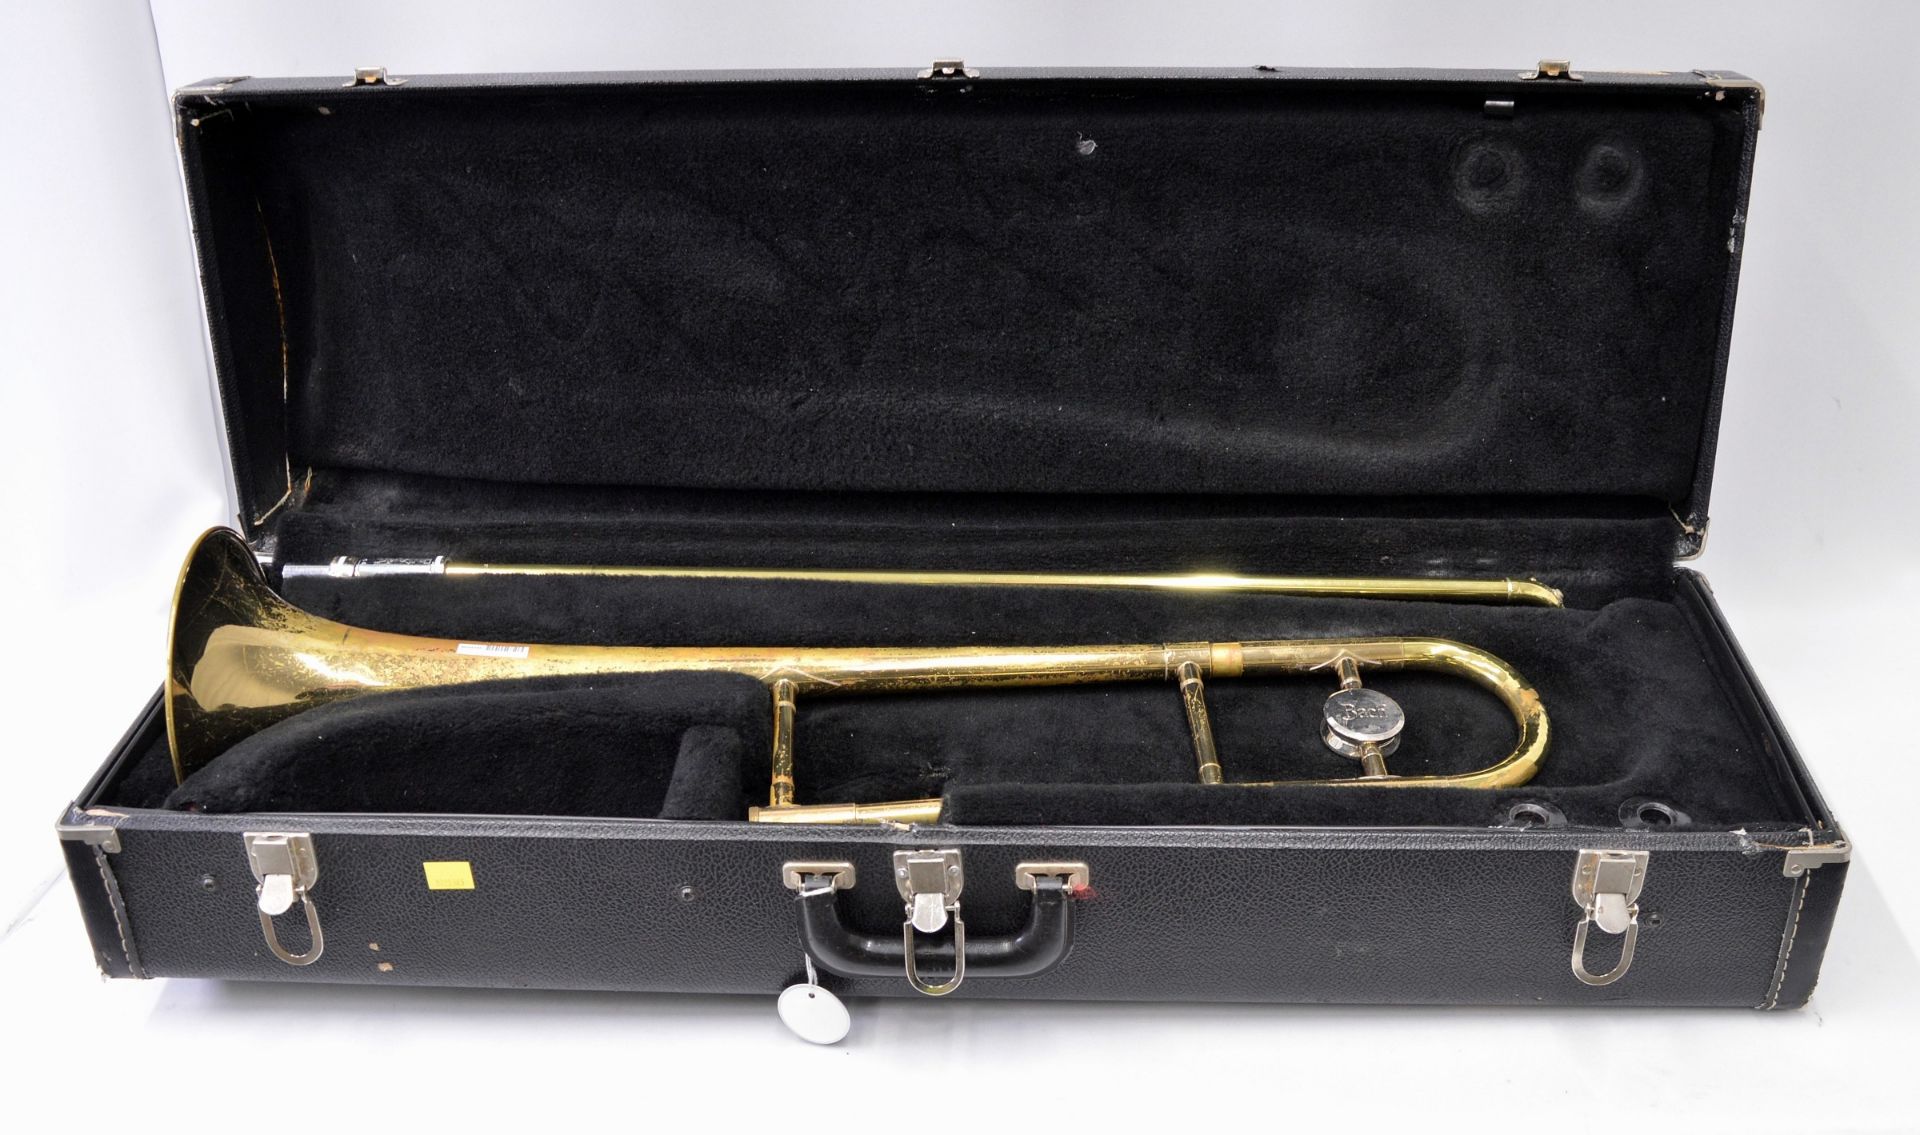 Bach Trombone with Case. Water key missing. Serial No. 89521.